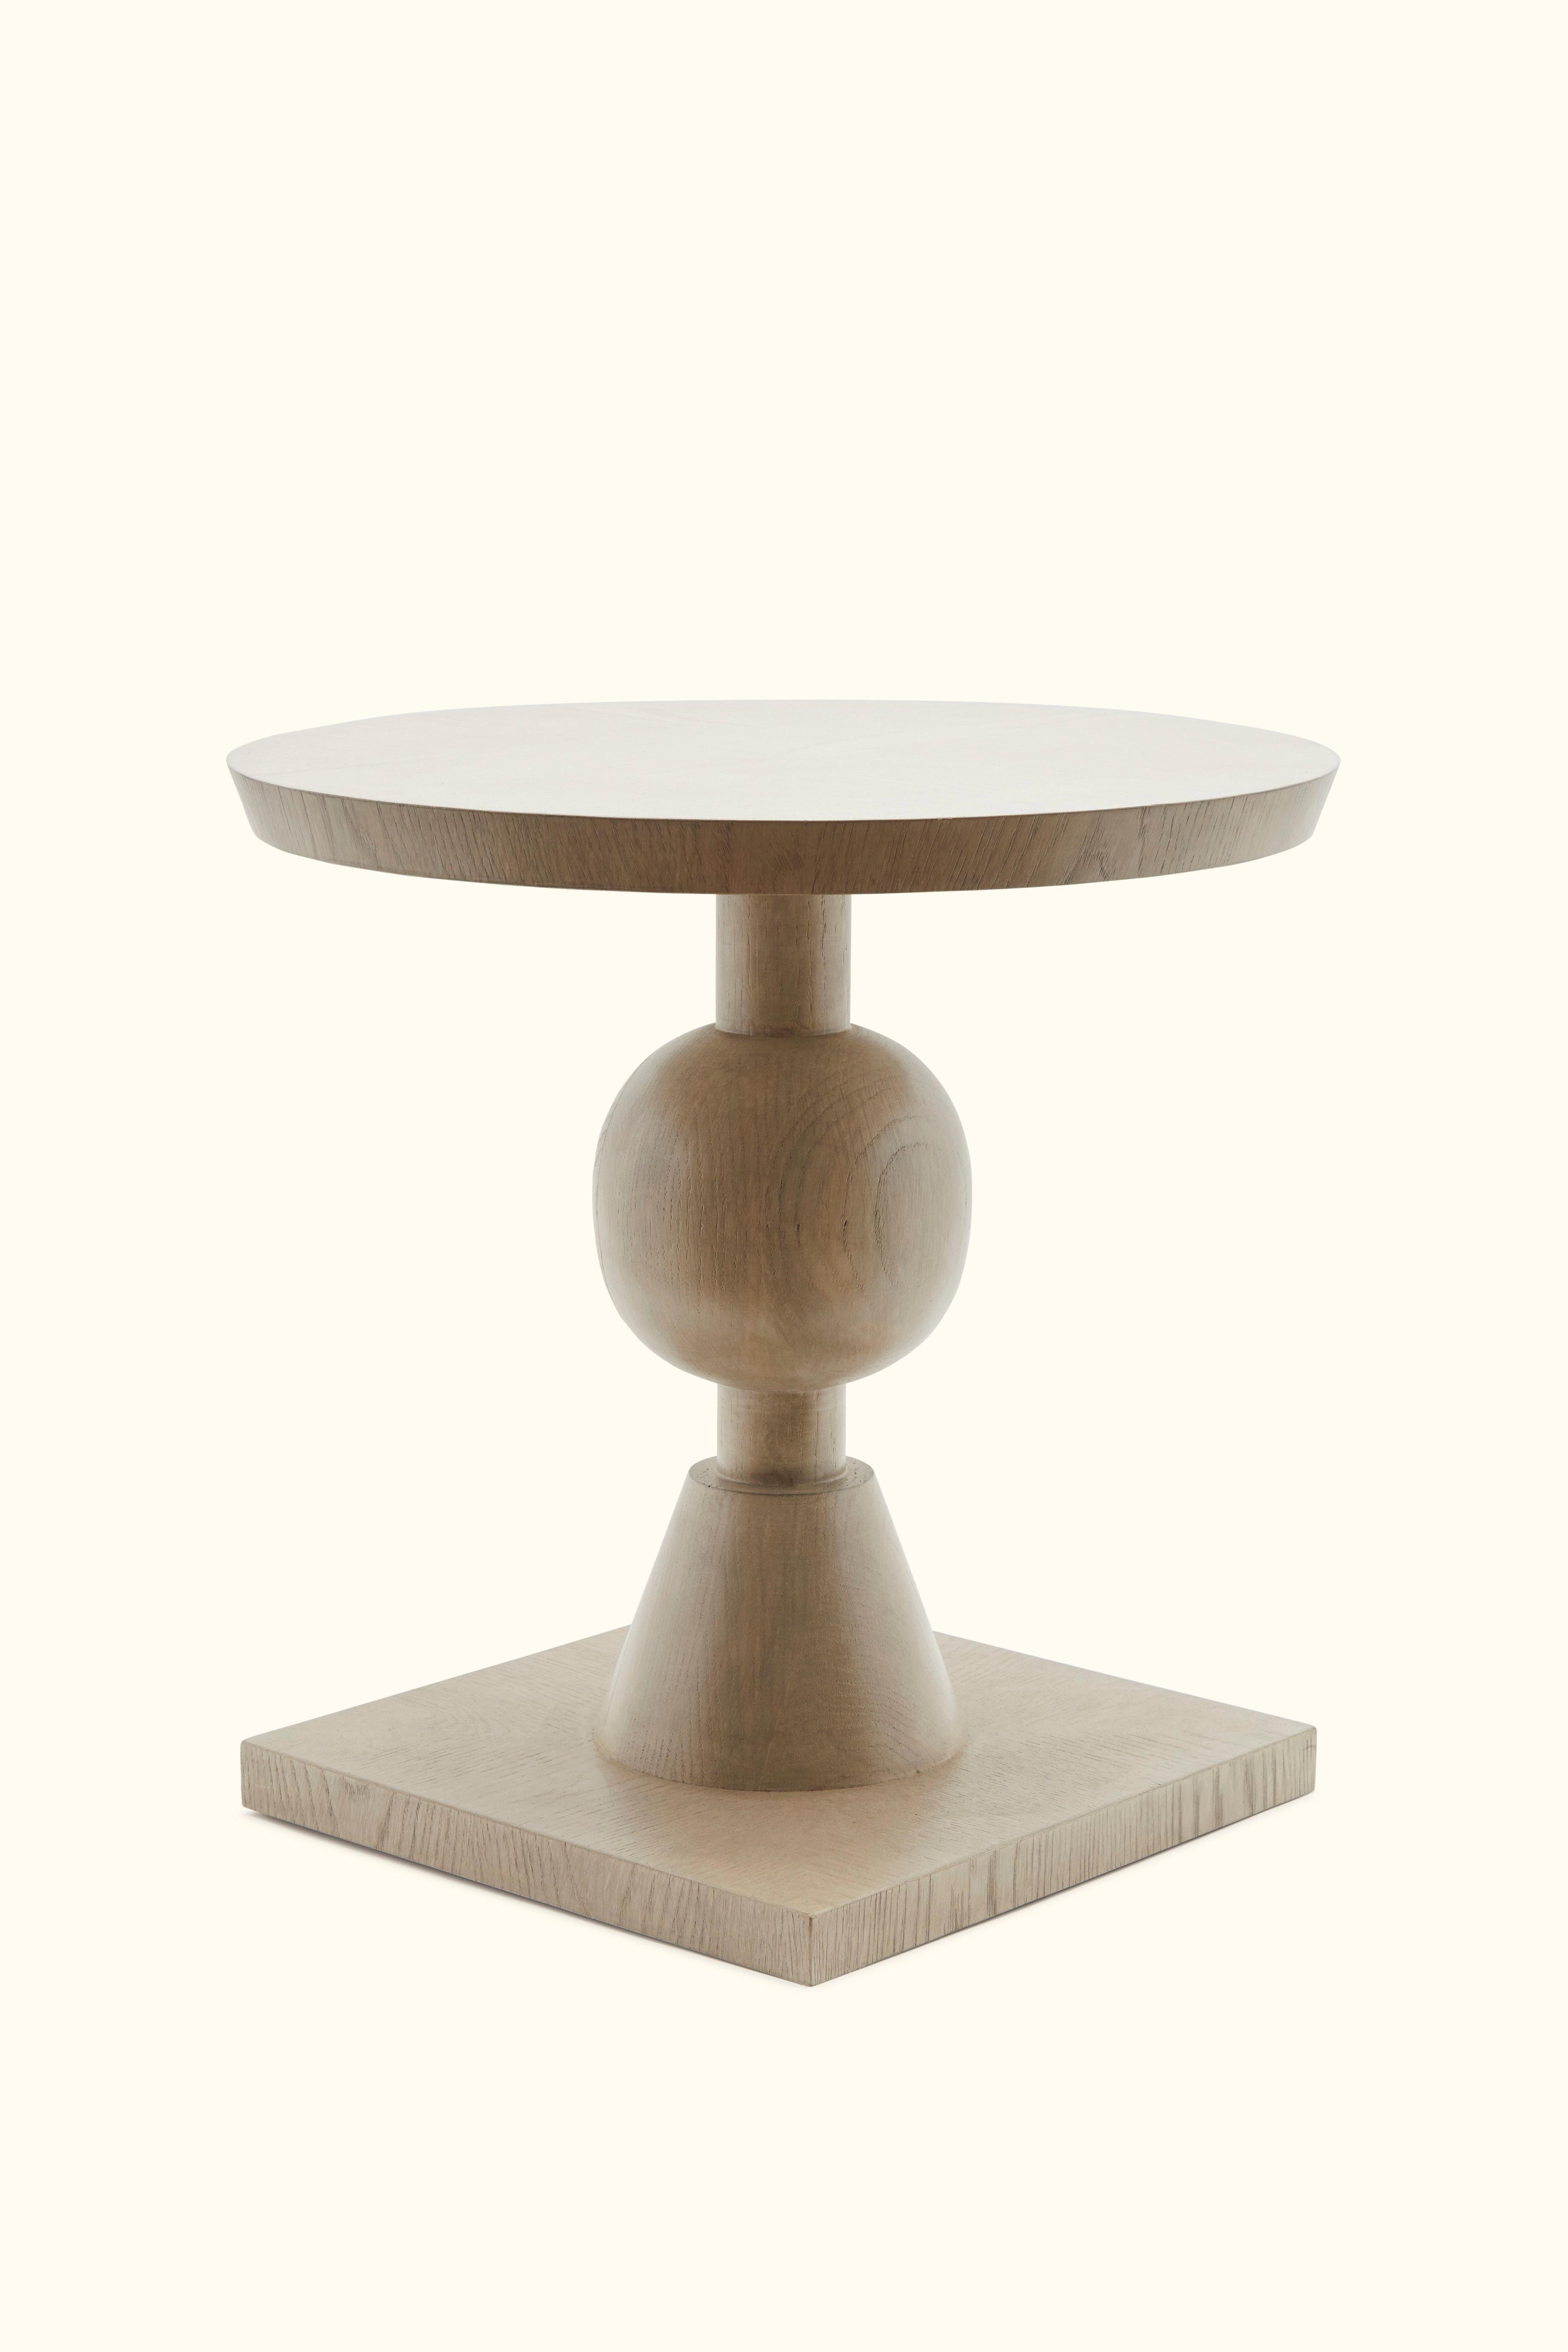 Mid-Century Modern White Washed Oak Sur Table by Lawson-Fenning